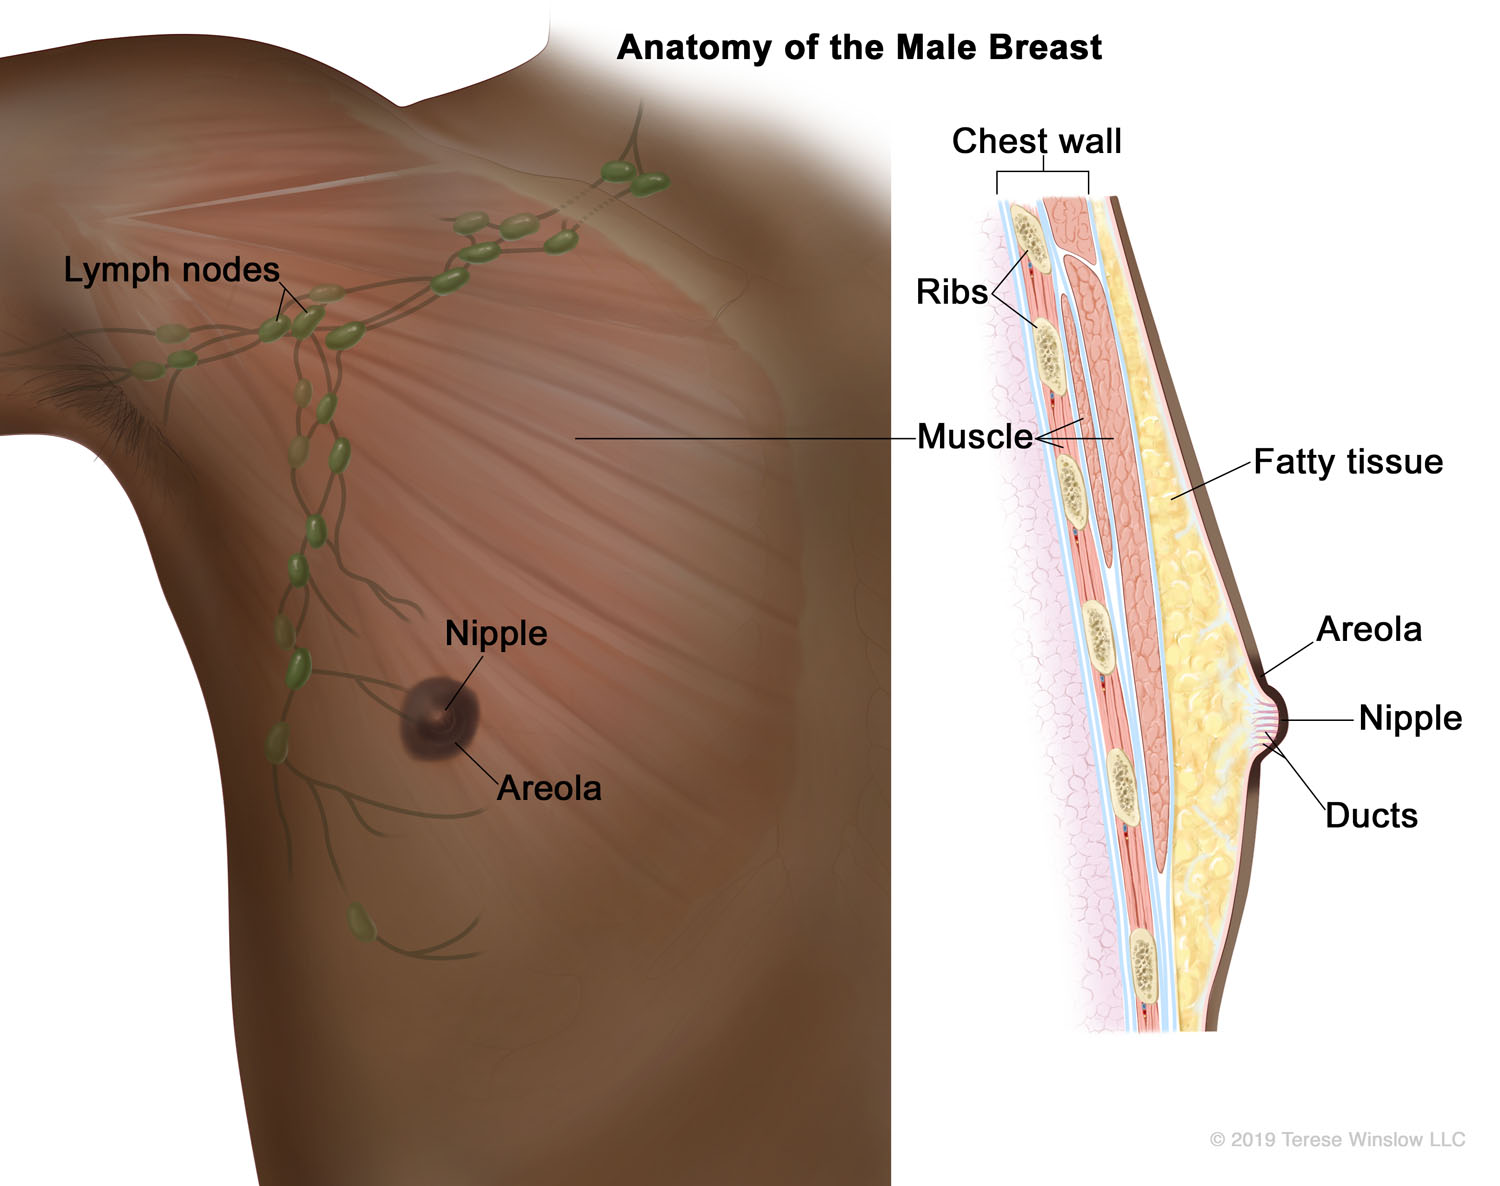 Anatomy of the Male Breast (Brown Skin)